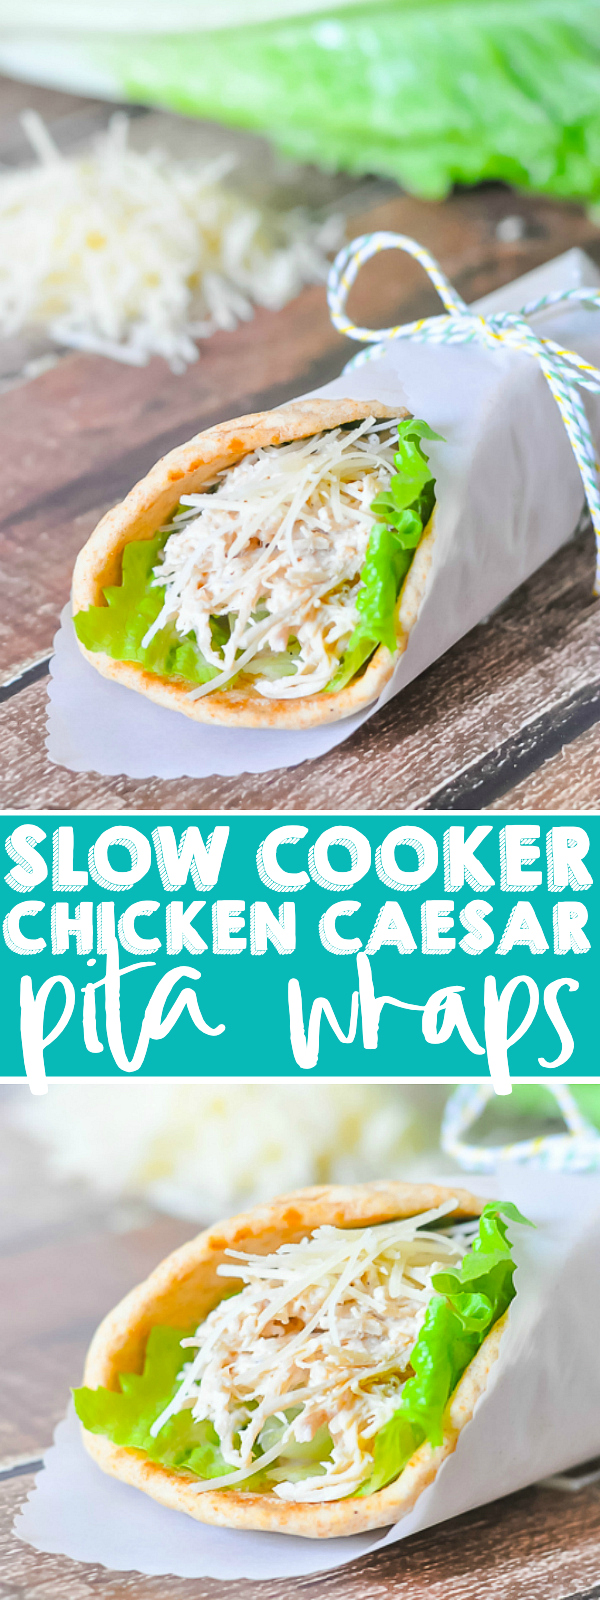 Slow Cooker Chicken Caesar Pitas are the perfect light summer meal! They take 5 minutes of prep time, require only 6 ingredients, and are DELICIOUS! Plus, it makes great leftovers! | THE LOVE NERDS 